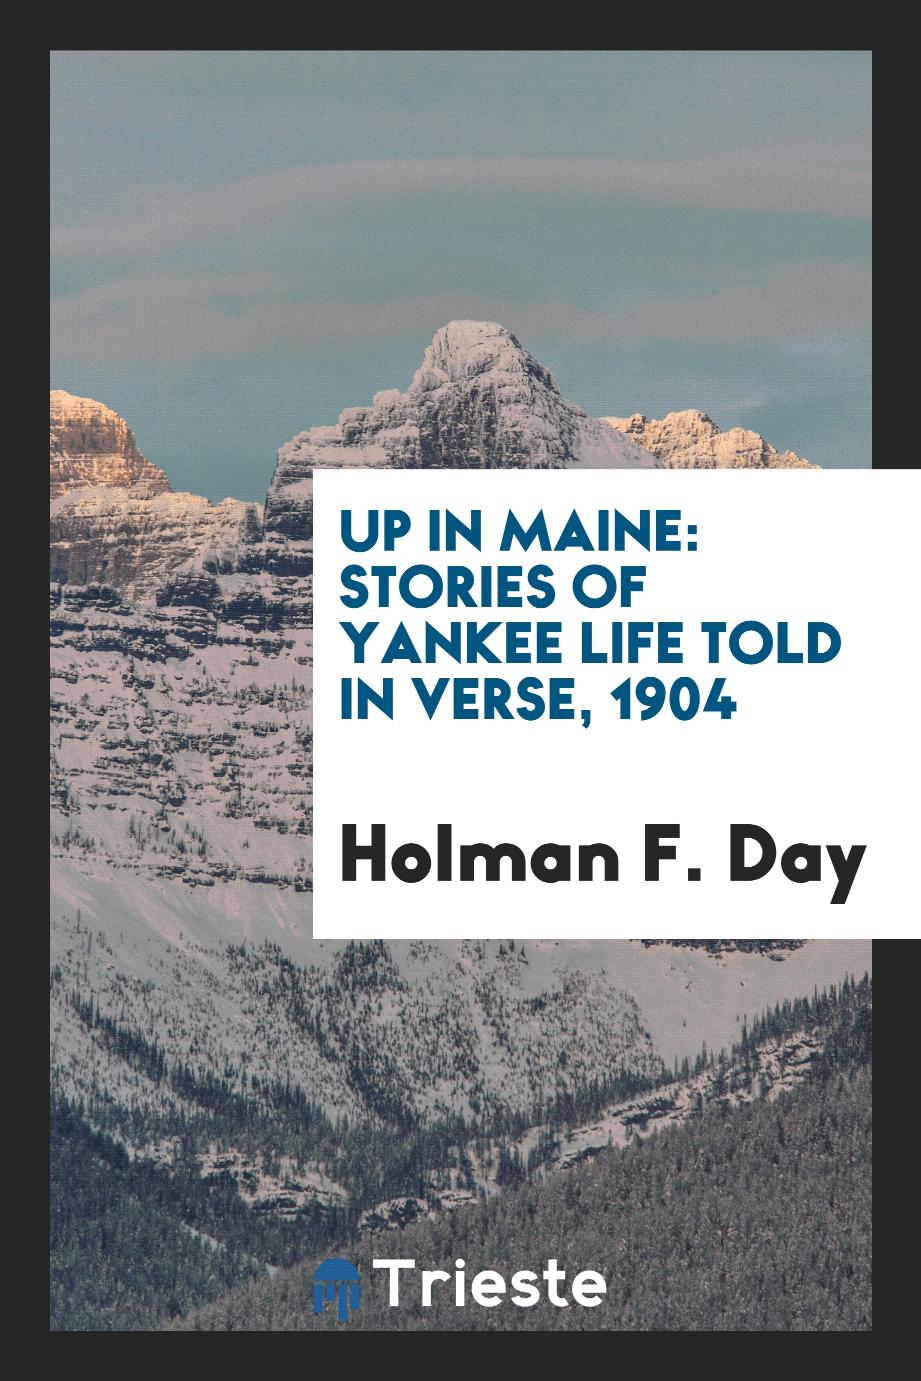 Up in Maine: Stories of Yankee Life Told in Verse, 1904